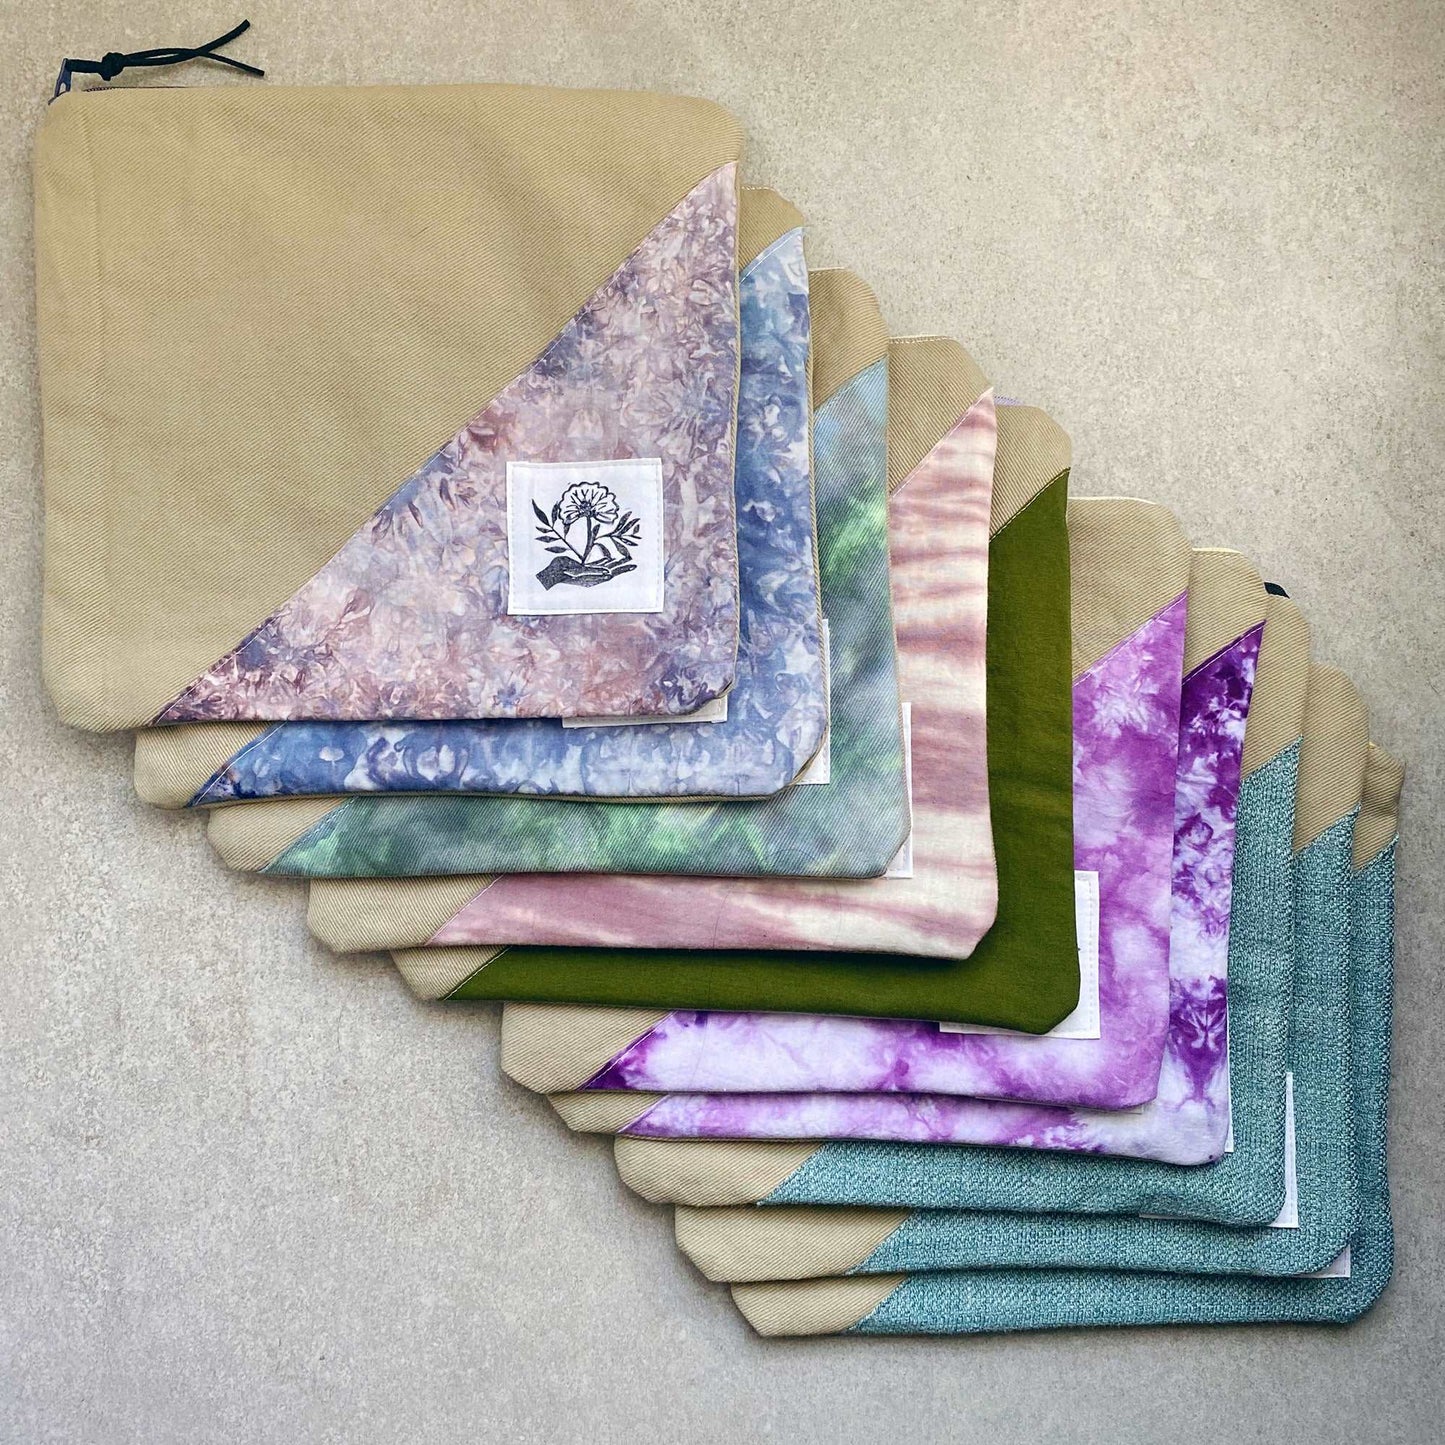 This is a photo of multiple canvas zip bags. Each bag is a little different, with fabric panels made from tie dyed fabric, solid fabric and textured fabric. Each bag includes a handprinted patch made by Sunny Chan of the Etsy shop moonandmountainprint. 